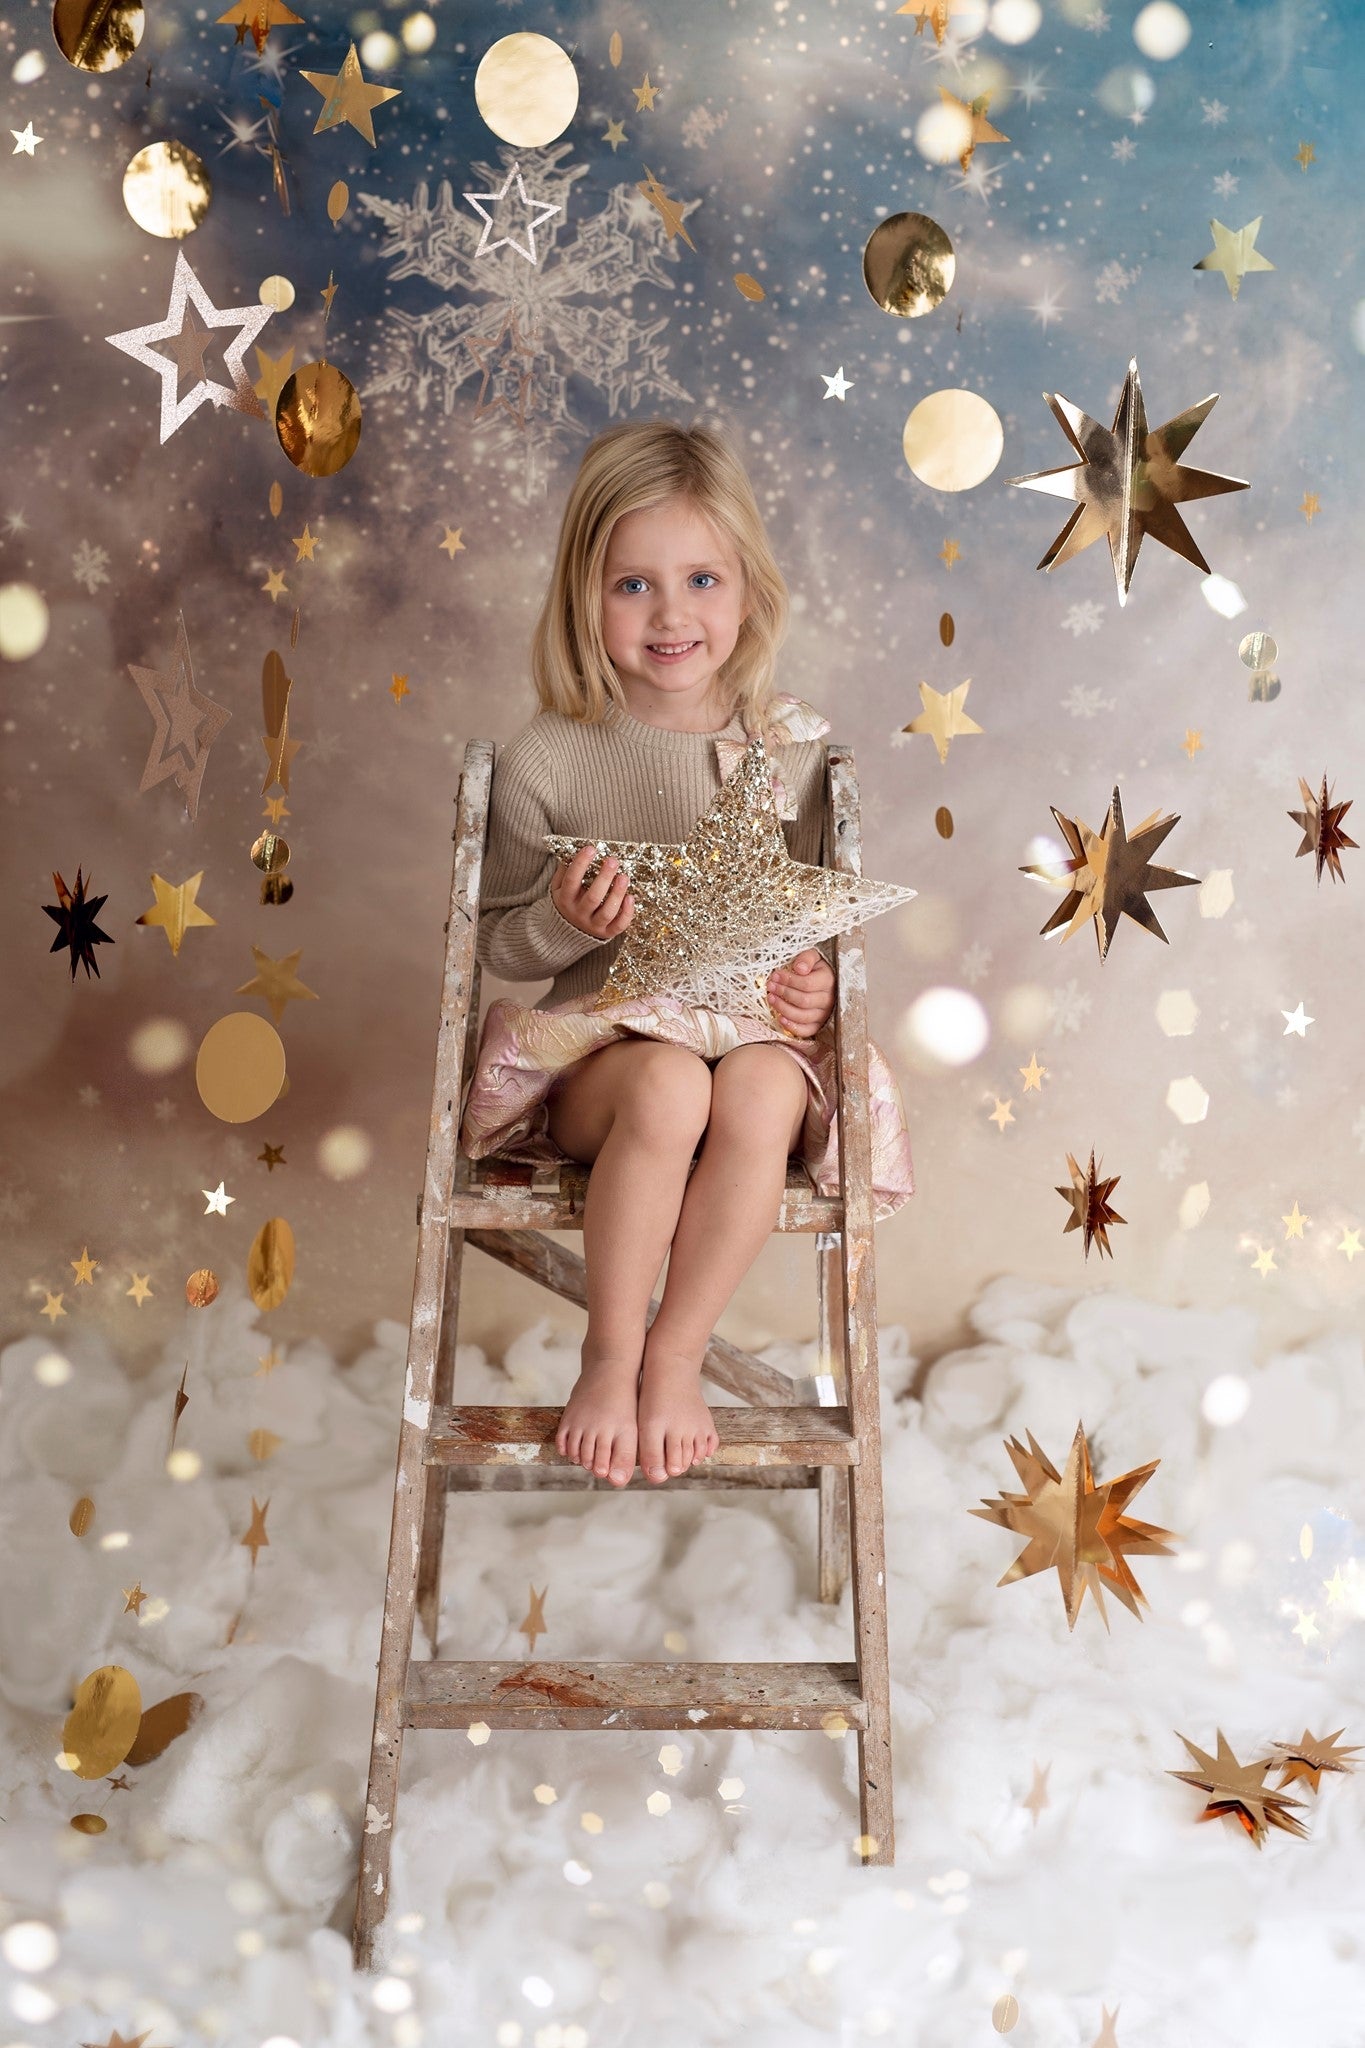 Kate Sparkling Frost Snowflakes Backdrop for Photography